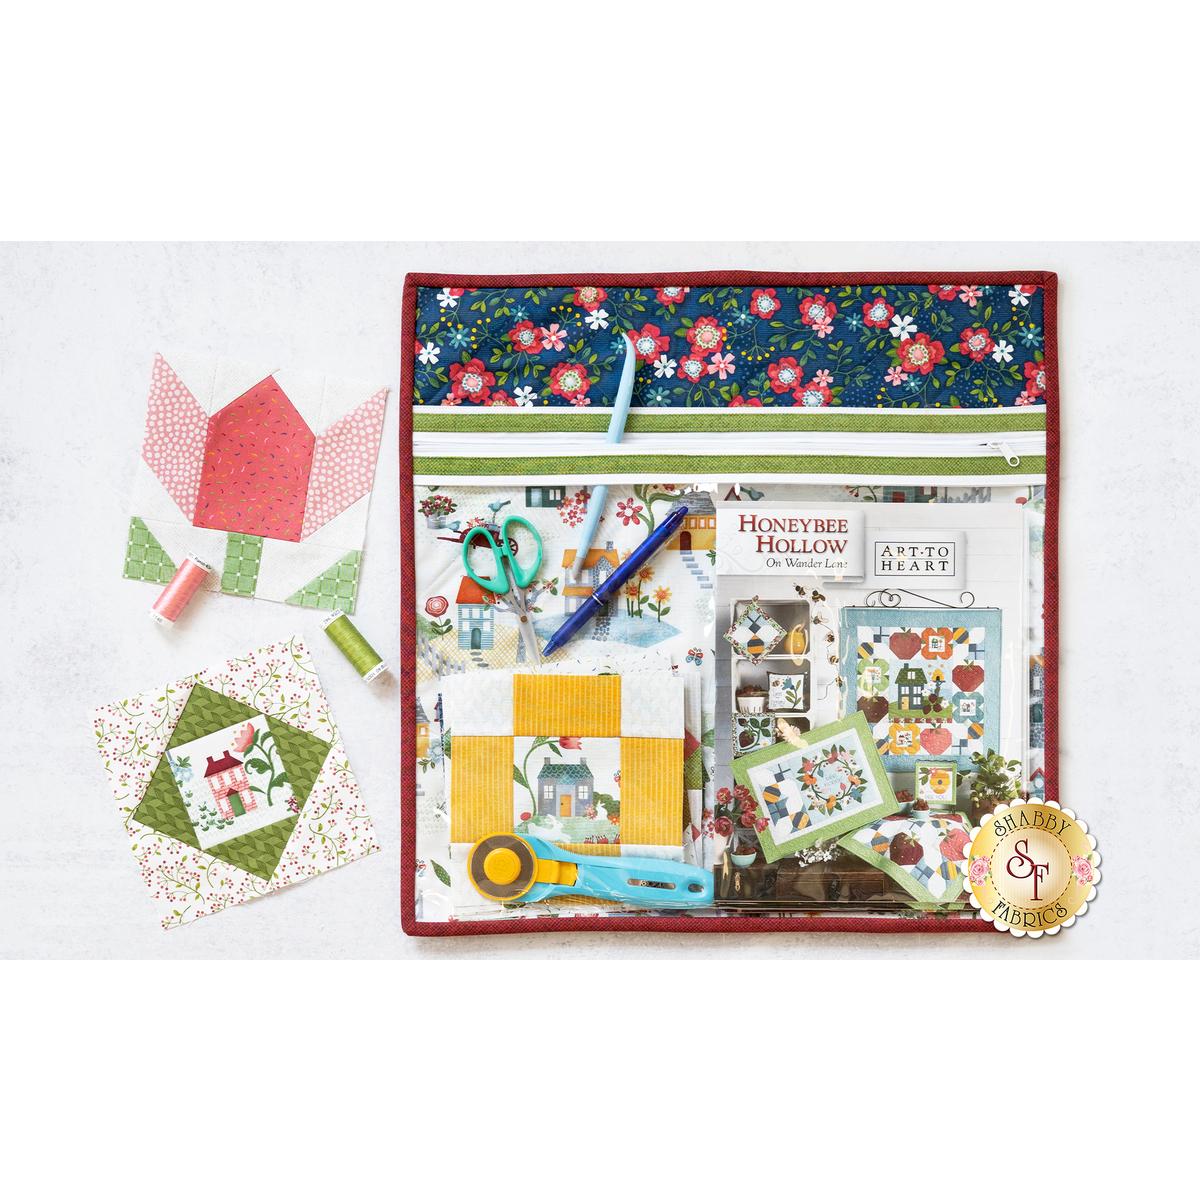 June Tailor Quilt As You Go Project Bag Kit-Red Zippity-Do-Done(TM